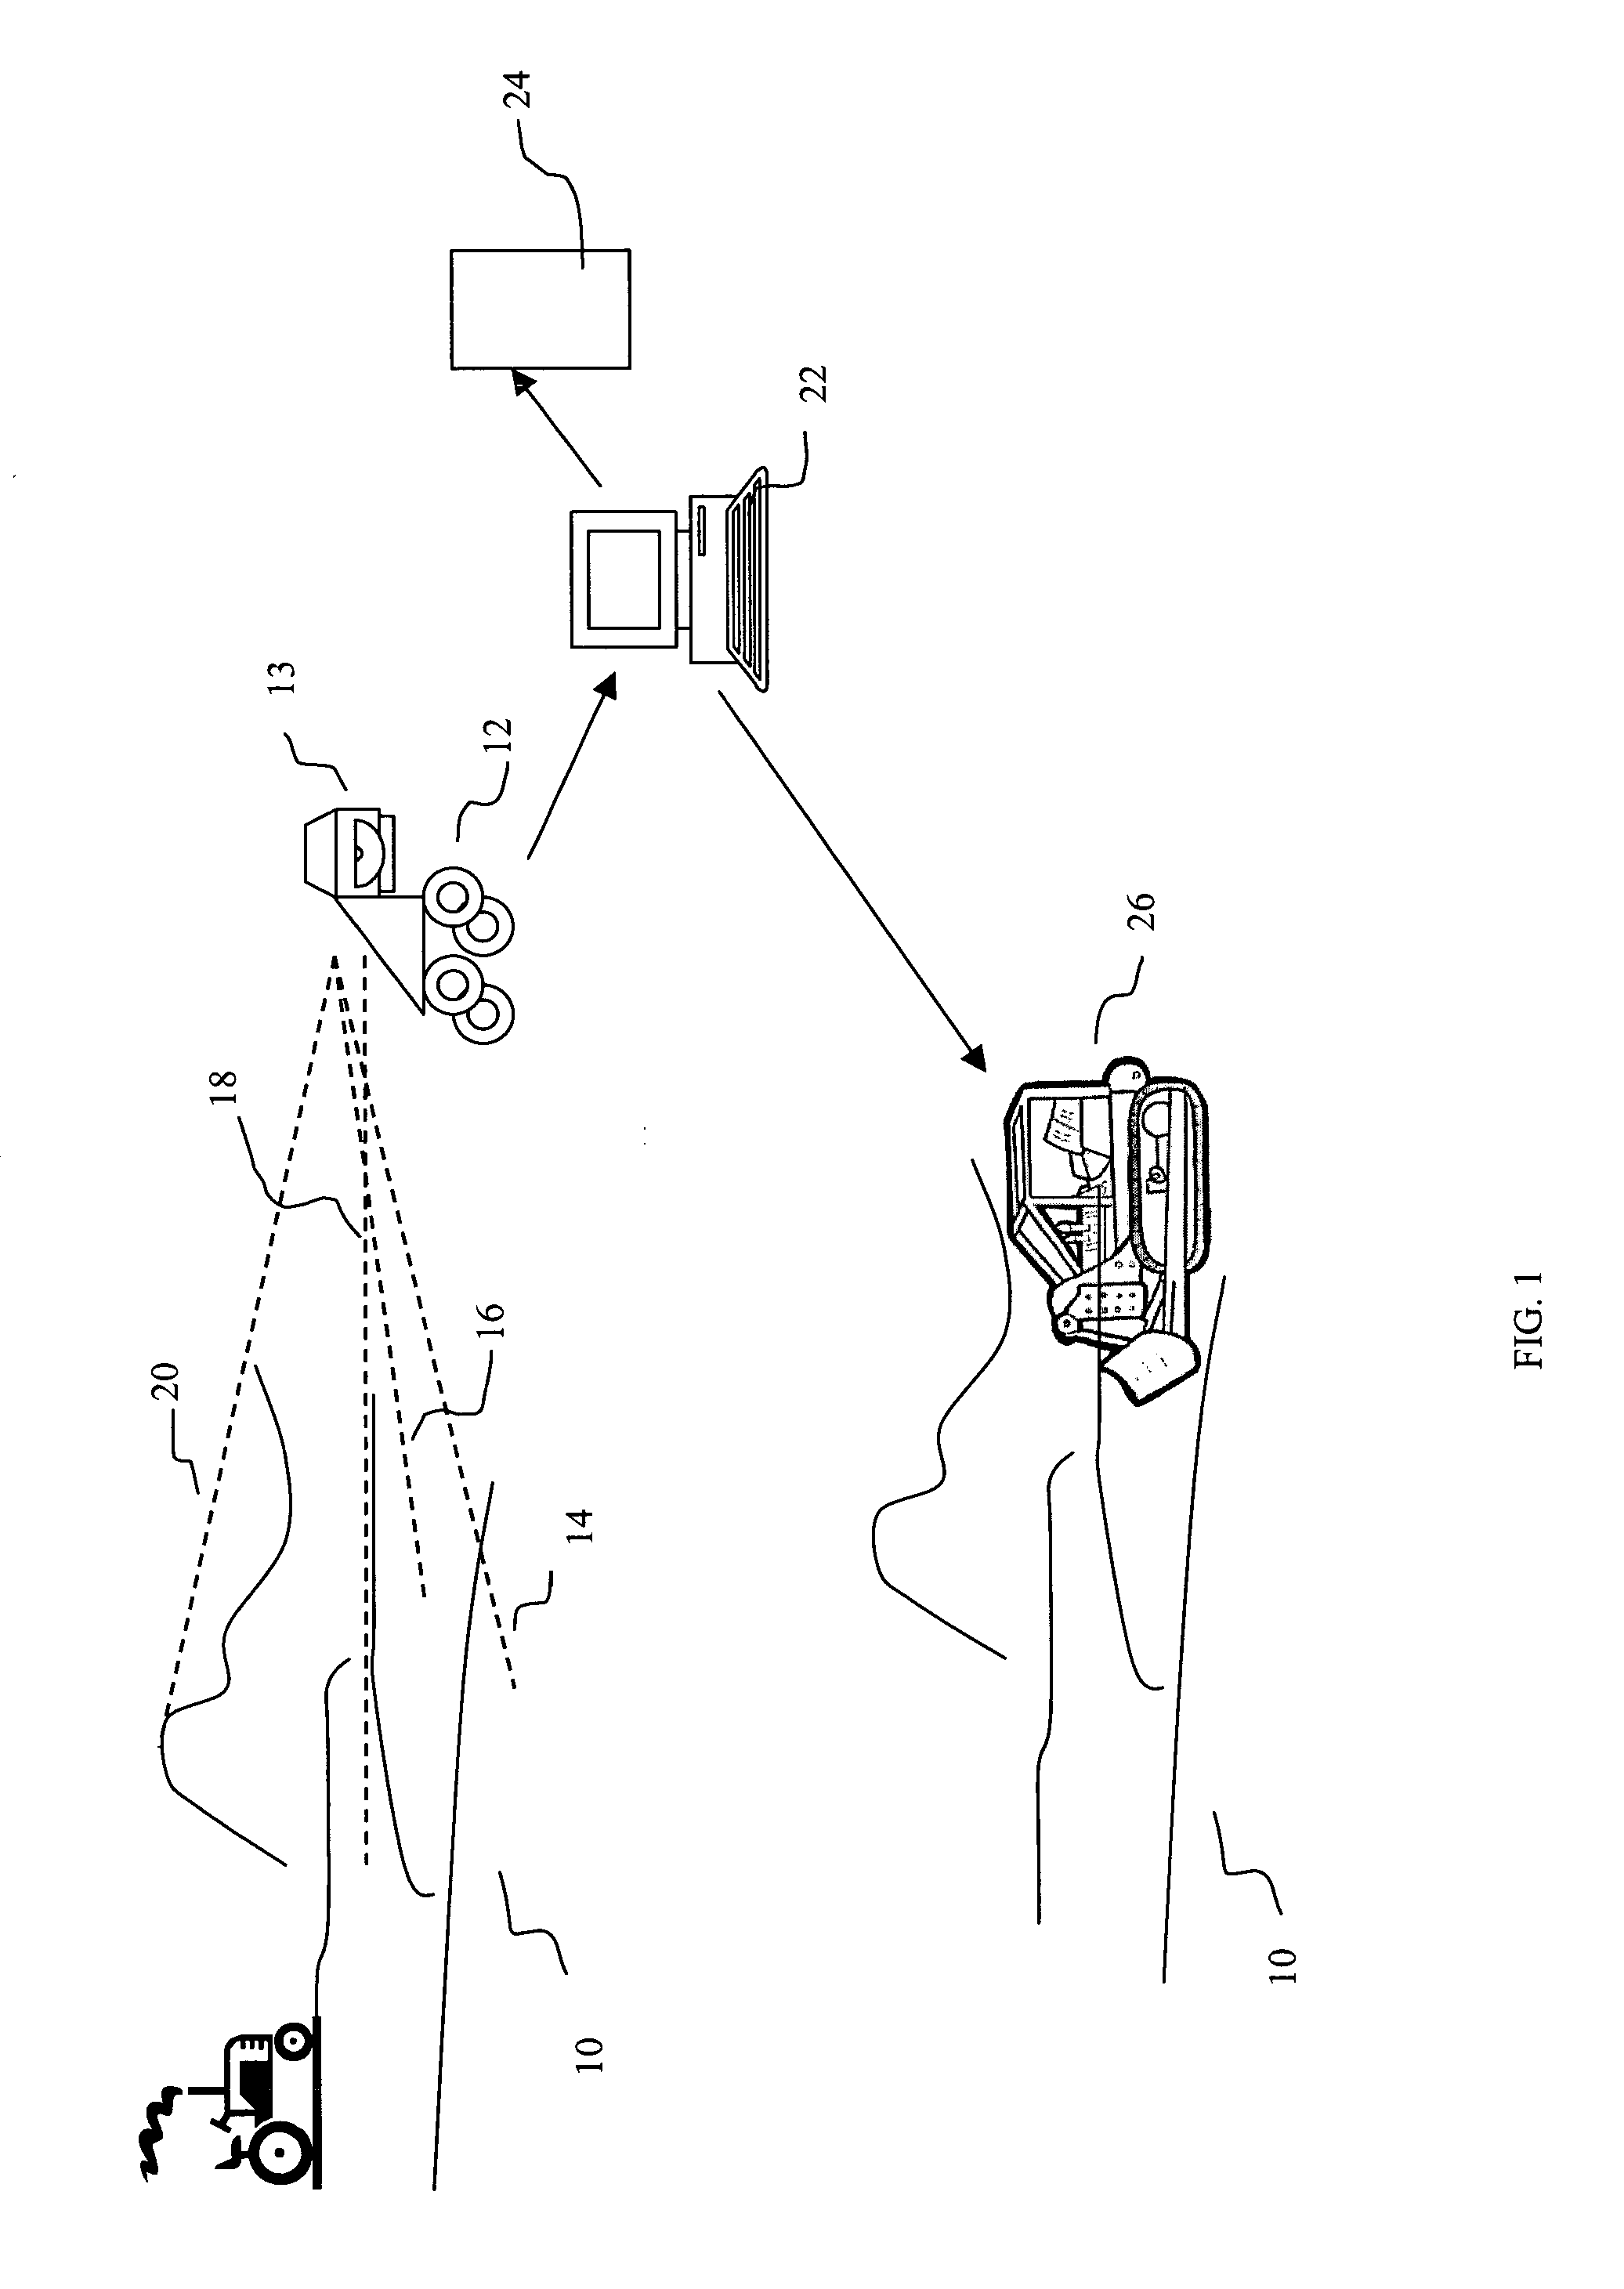 System and method of sub-surface system design and installation